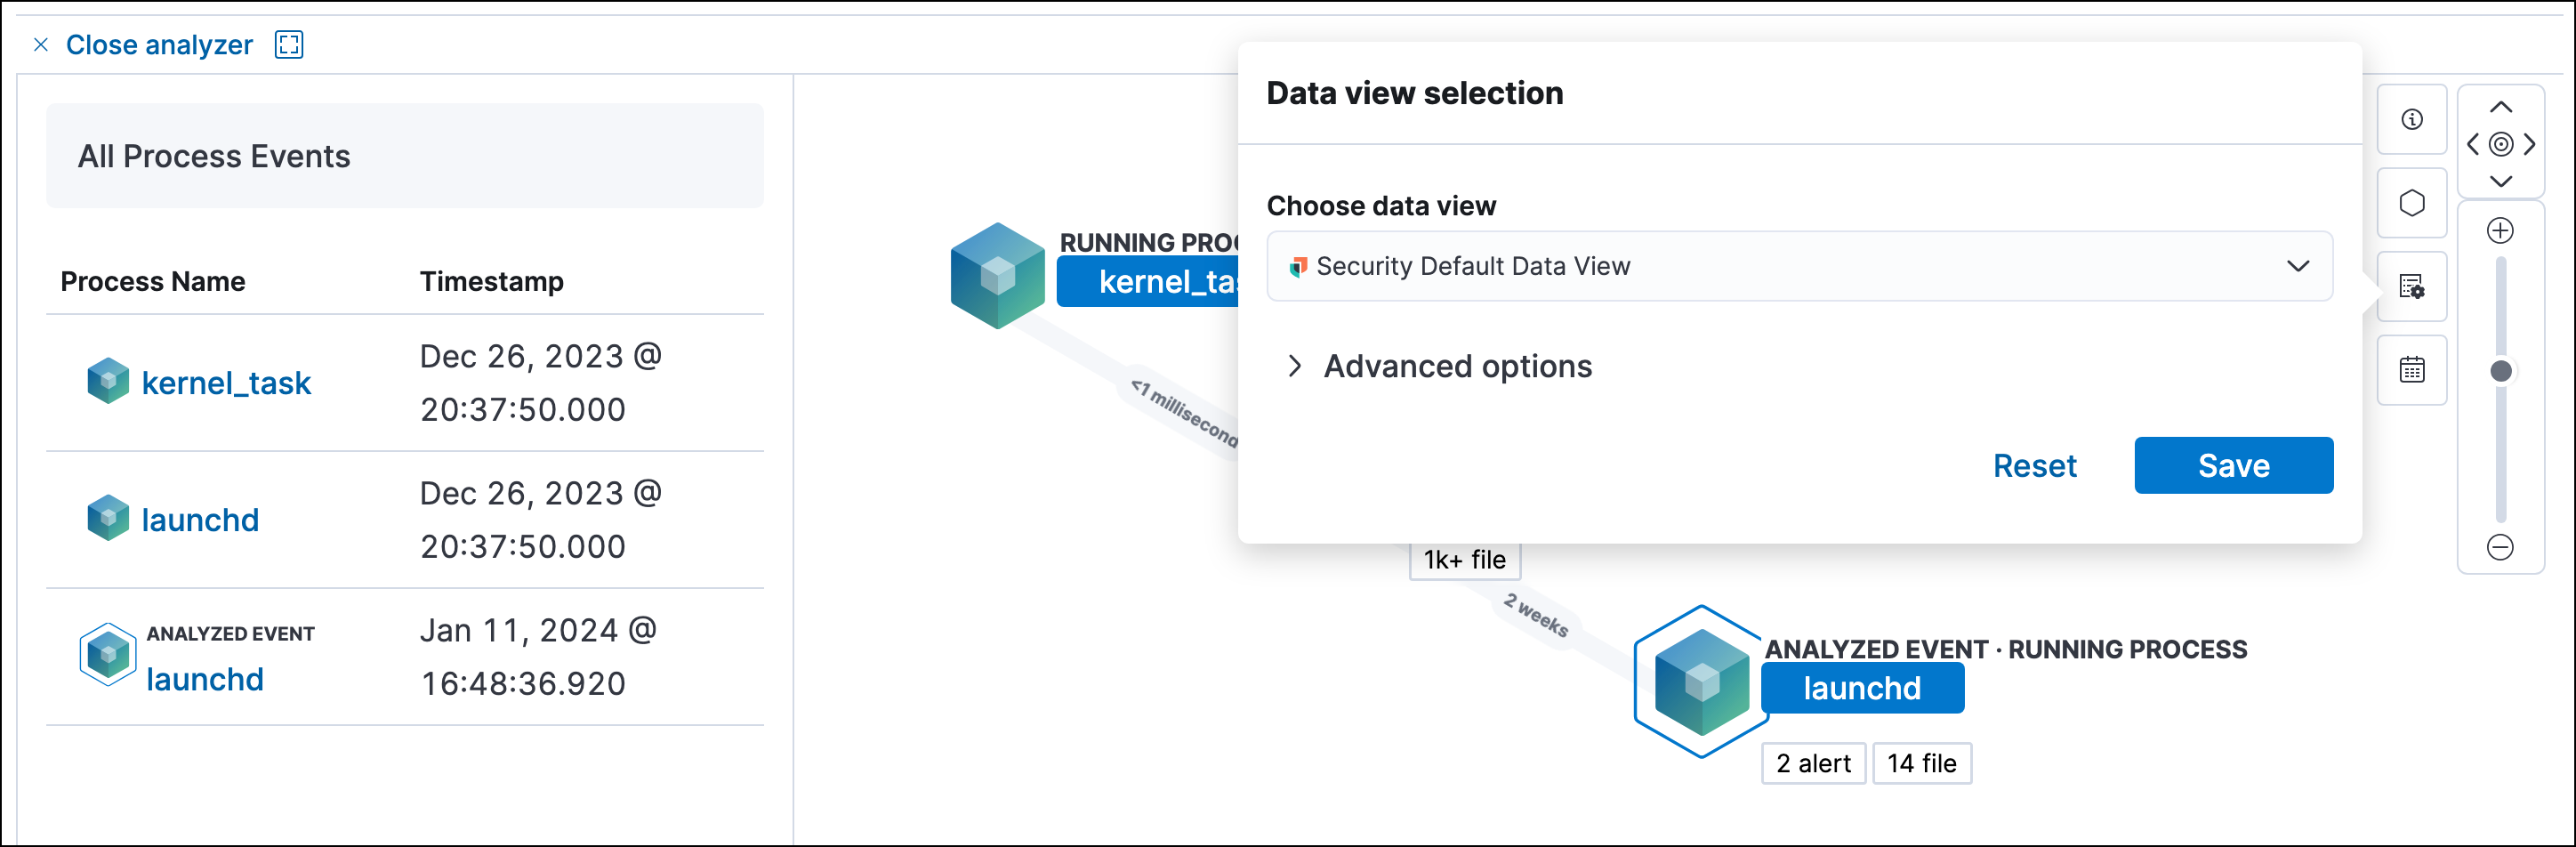 data view selection